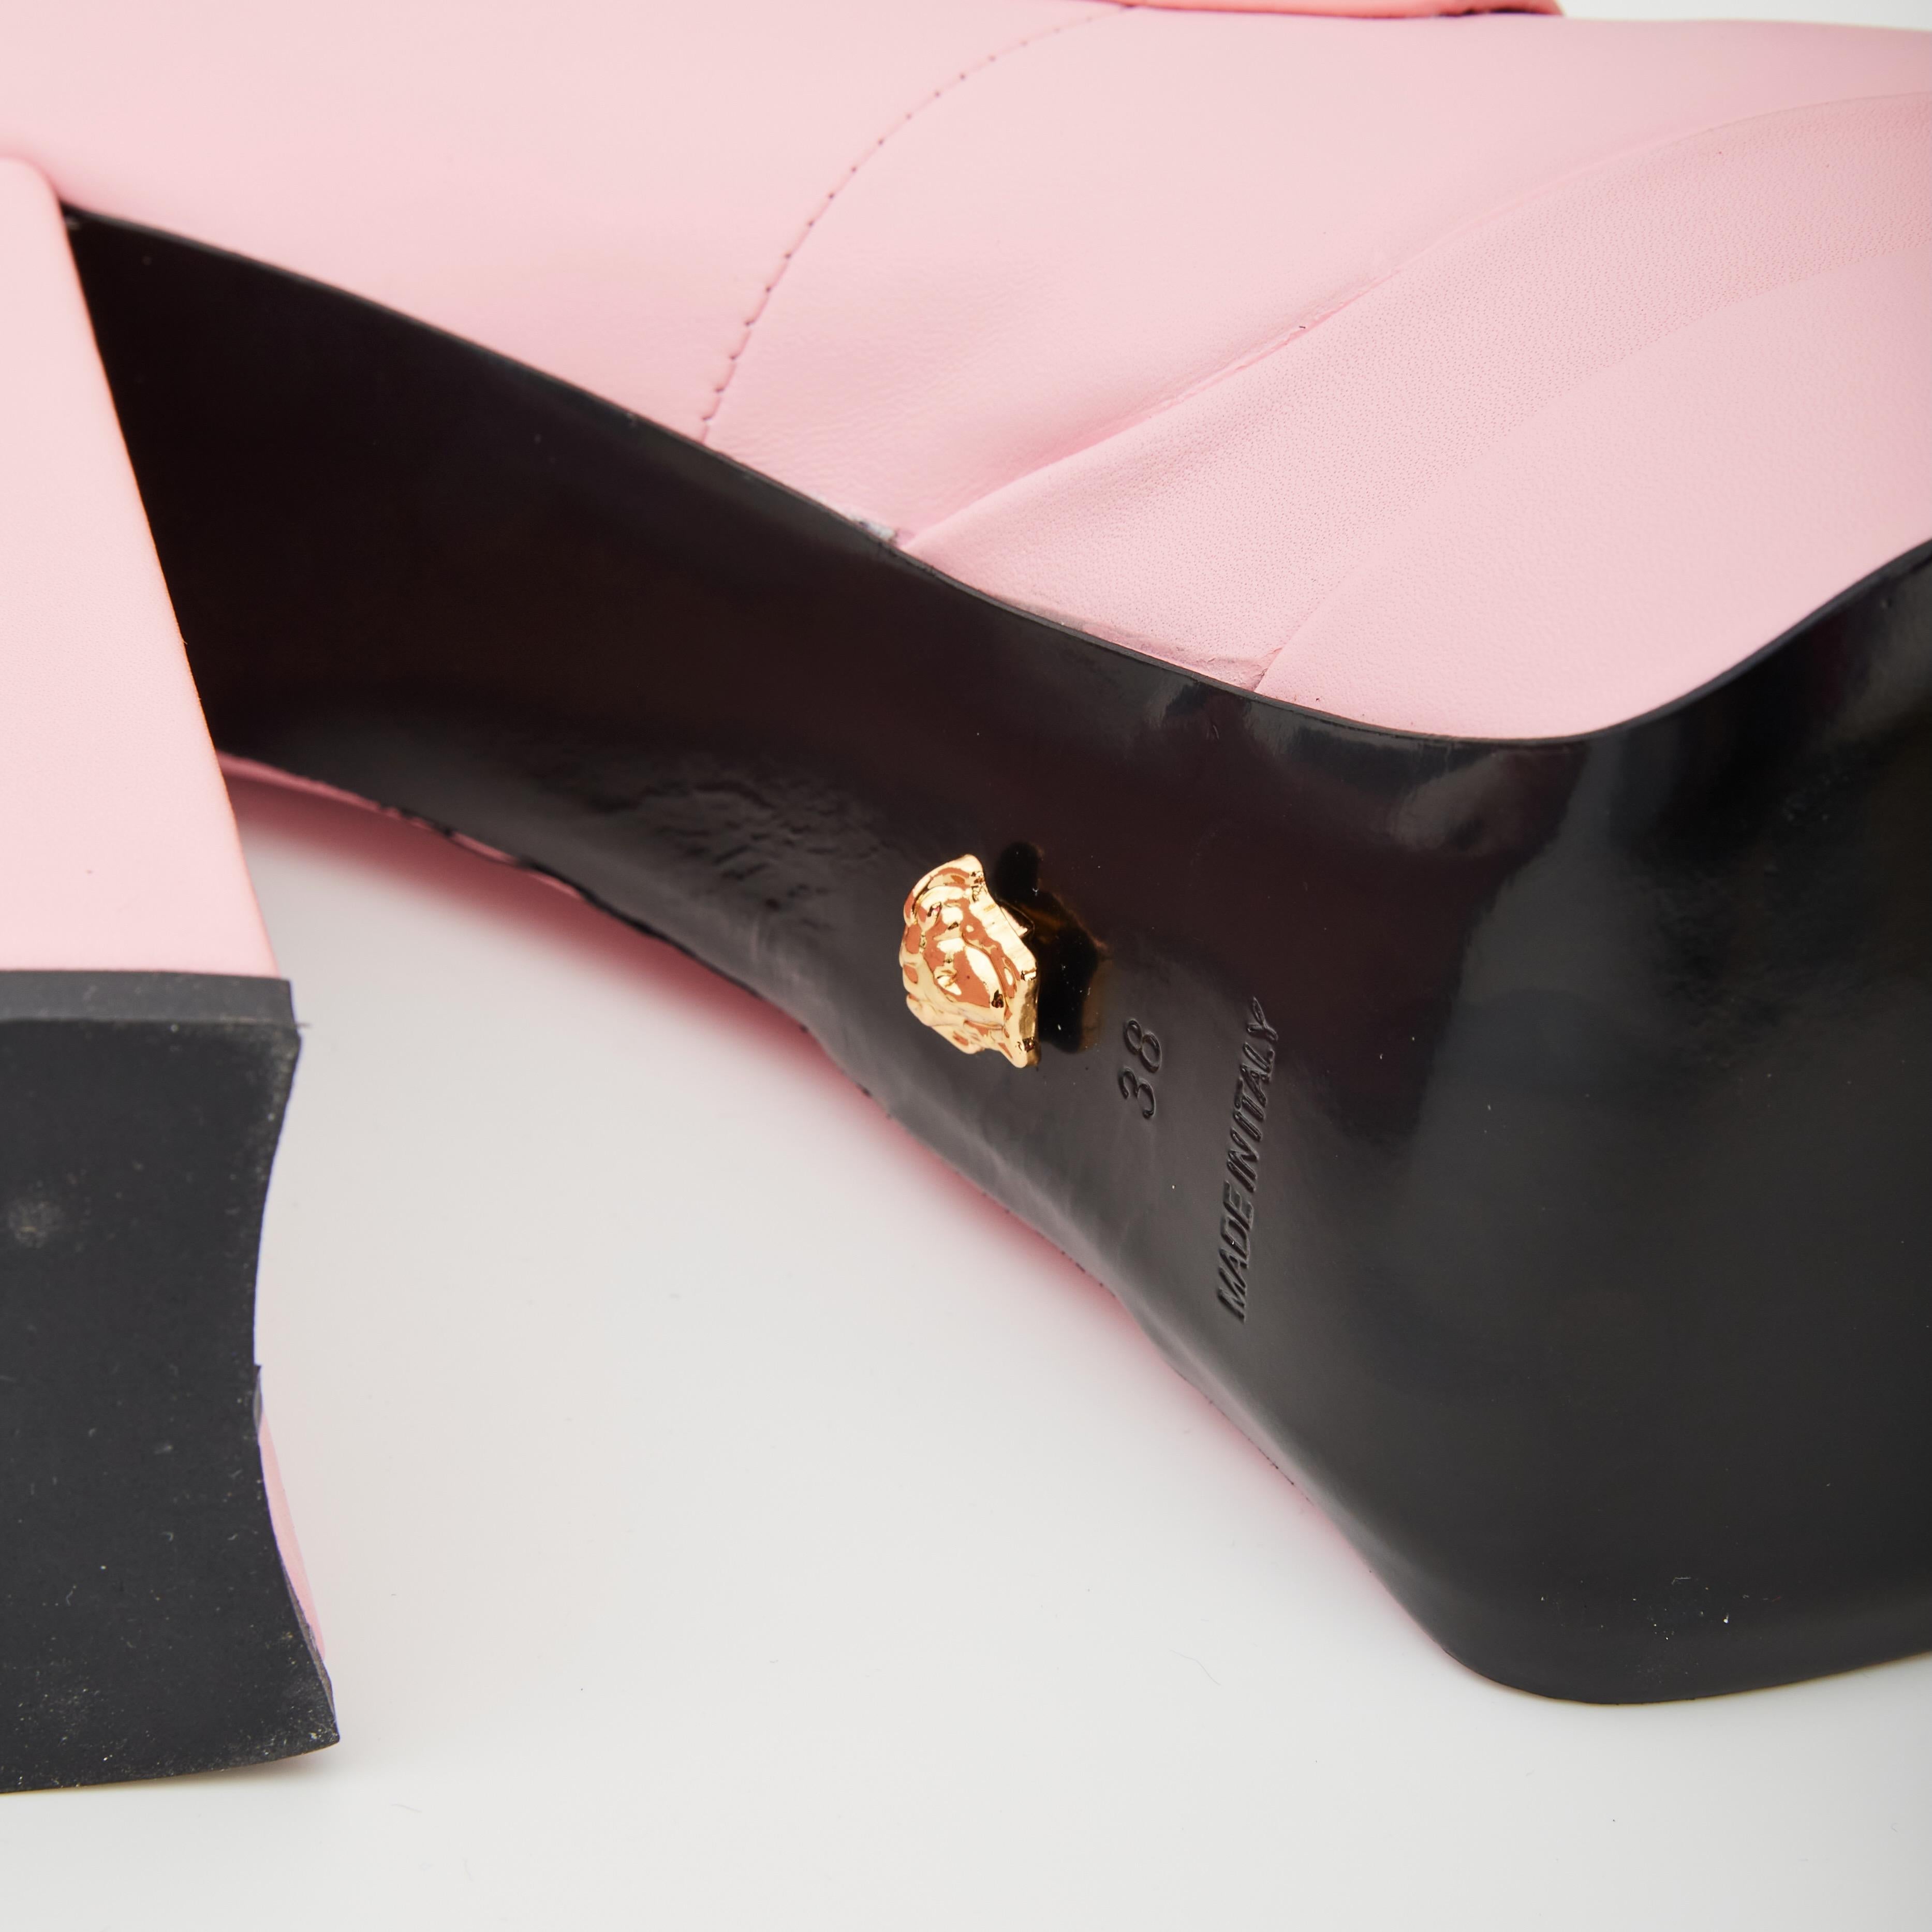 Versace Juno Candy Pink Platform Pumps (38 Eu) In New Condition For Sale In Montreal, Quebec